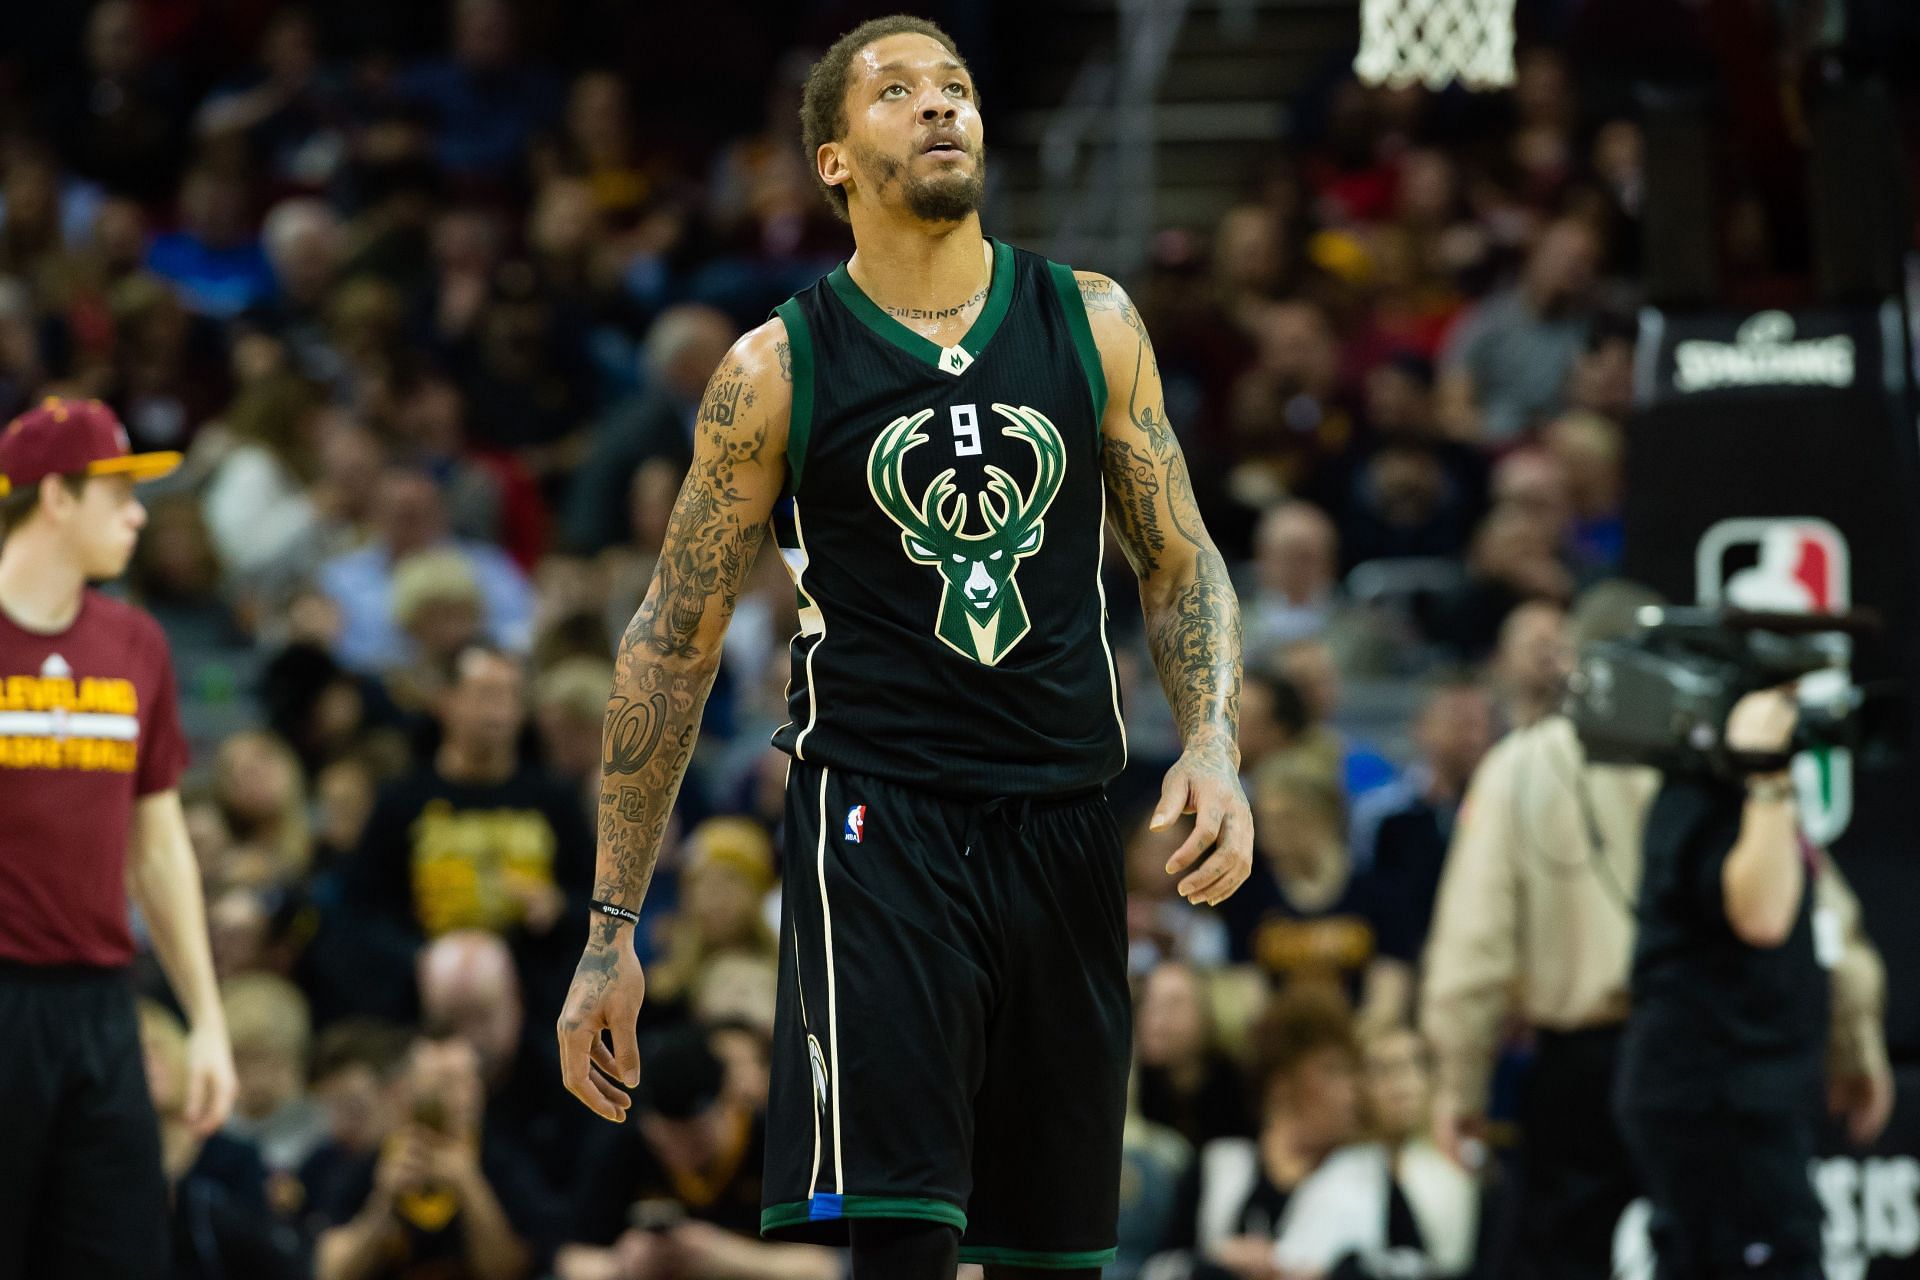 WATCH: Michael Beasley Tried To Check Into Game Wearing The Wrong Shorts